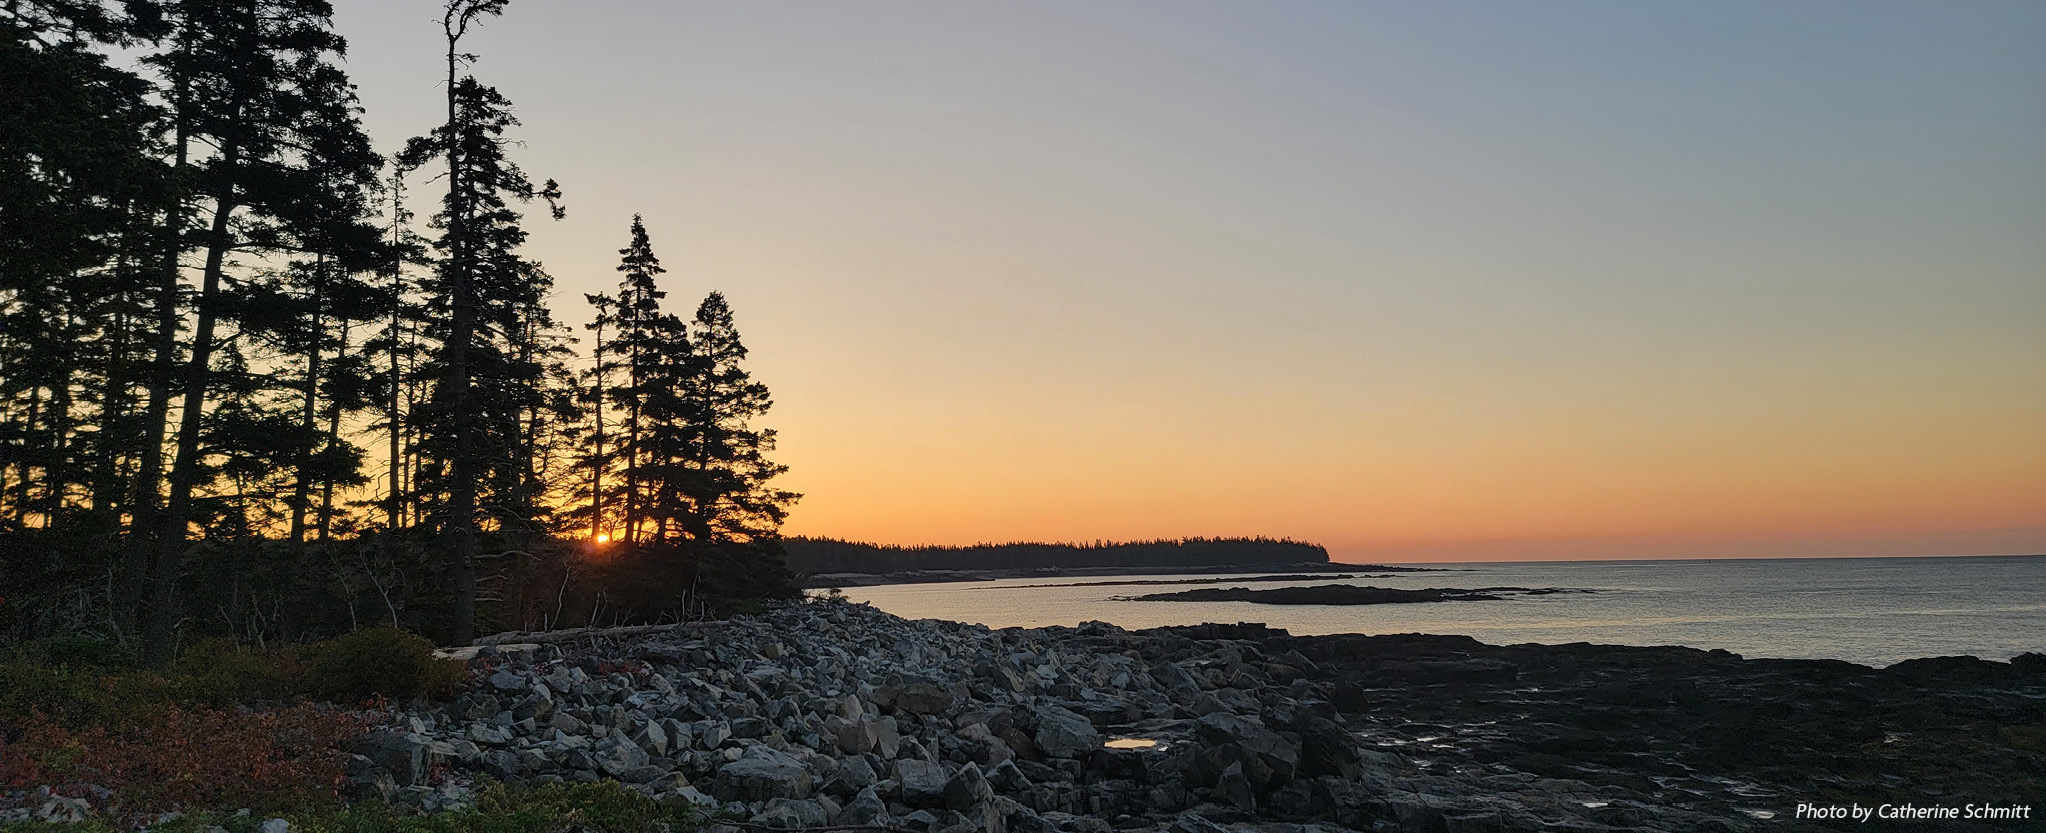 Sunrise view near Schoodic Point in Acadia National Park.